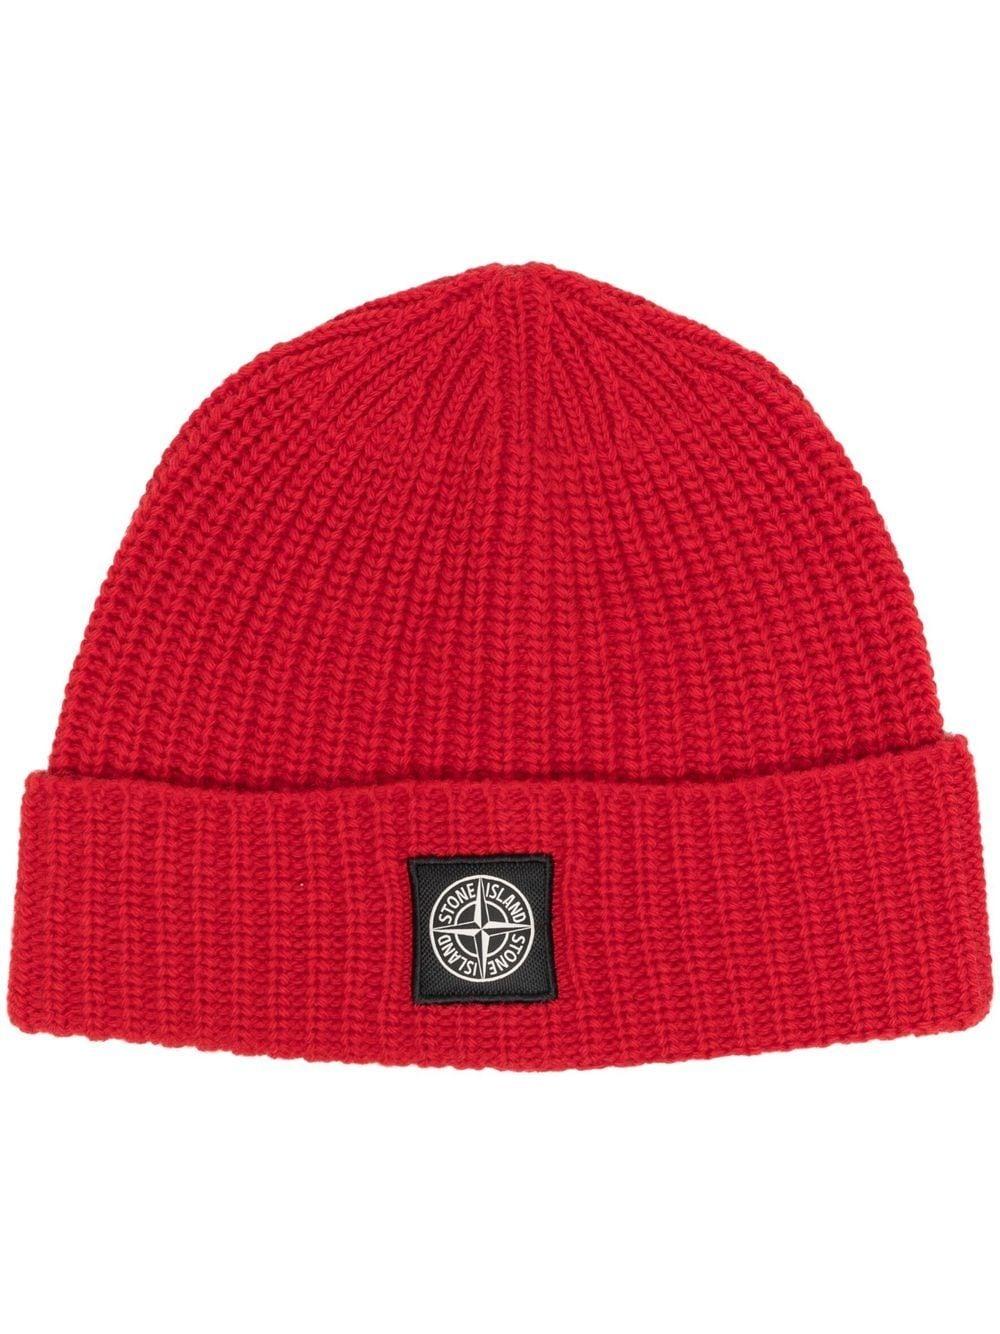 Stone Island Logo Patch Ribbed Beanie Hat in Red for Men | Lyst